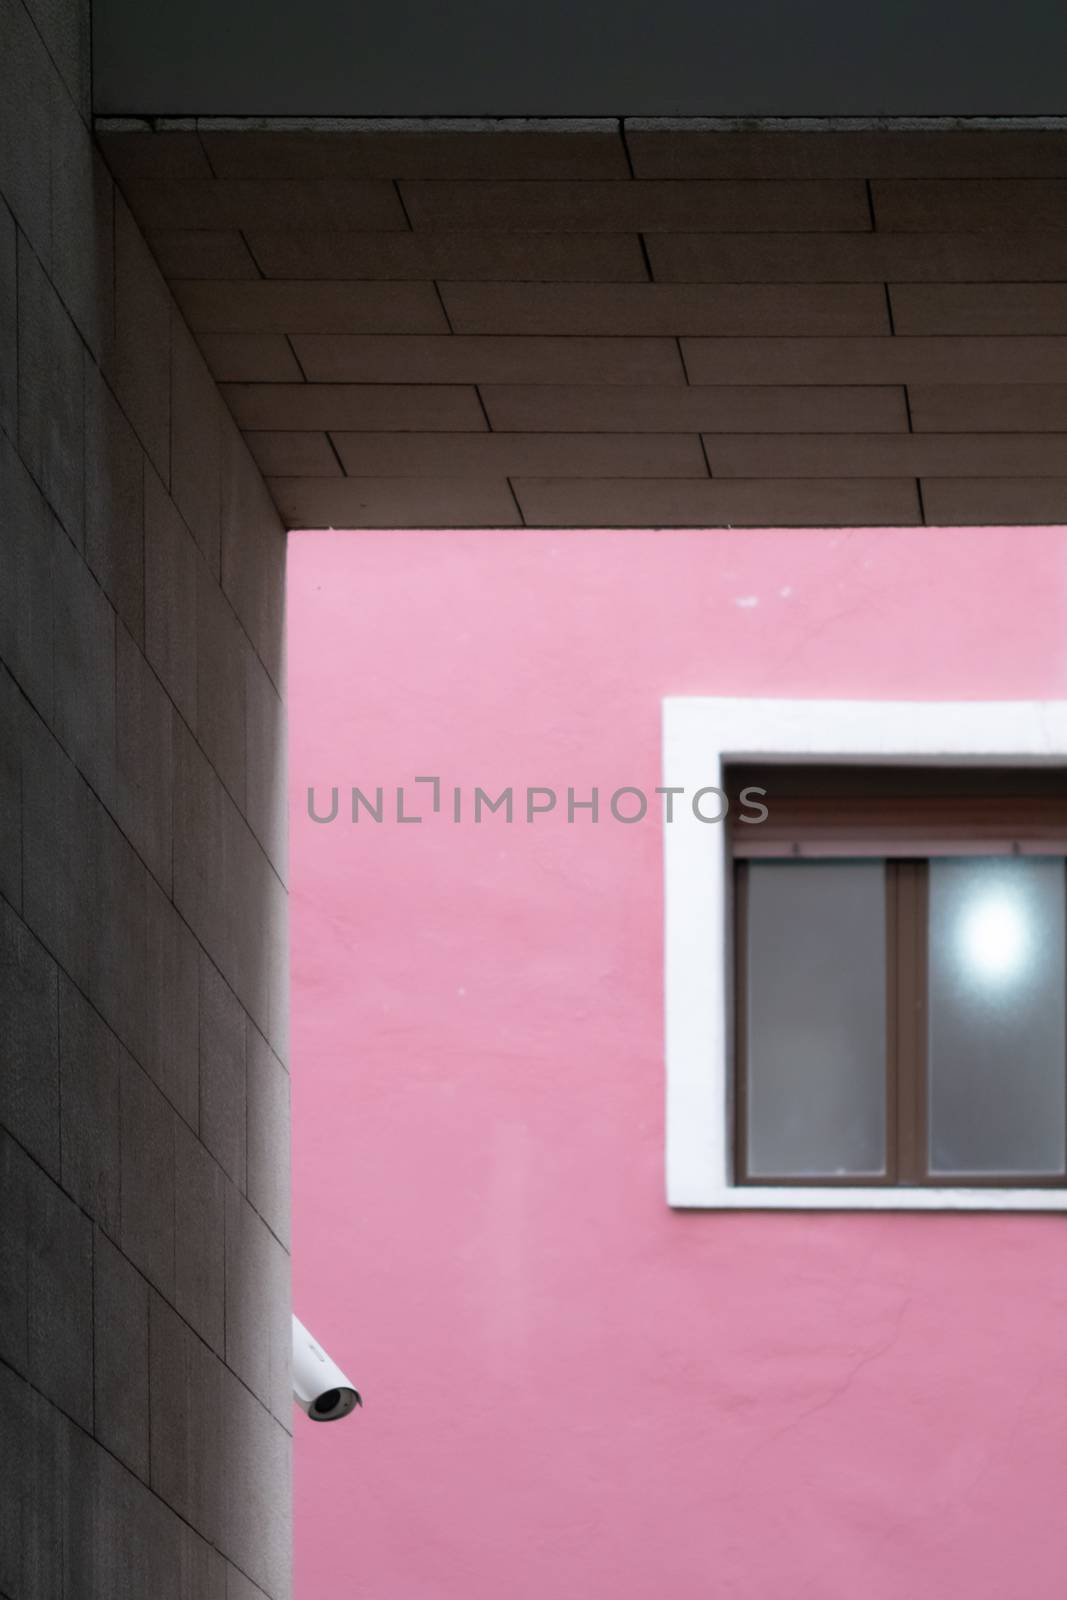 Composition of parallel and perpendicular lines with a window and a security camera on a magenta wall, framed with blocks of gray cement.